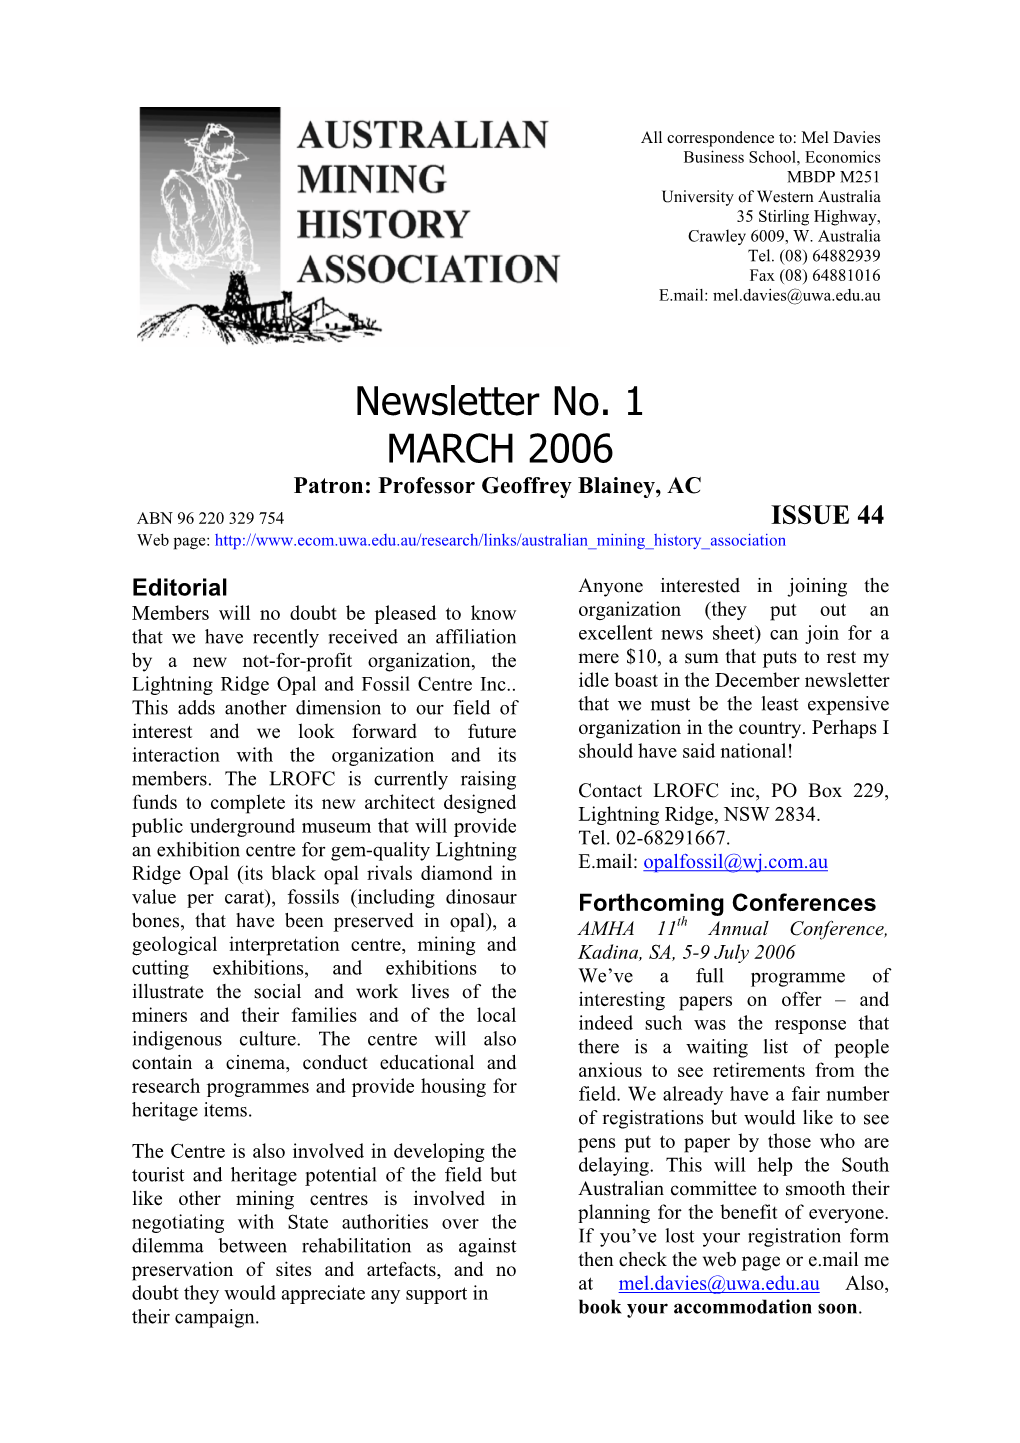 Newsletter No. 1 MARCH 2006